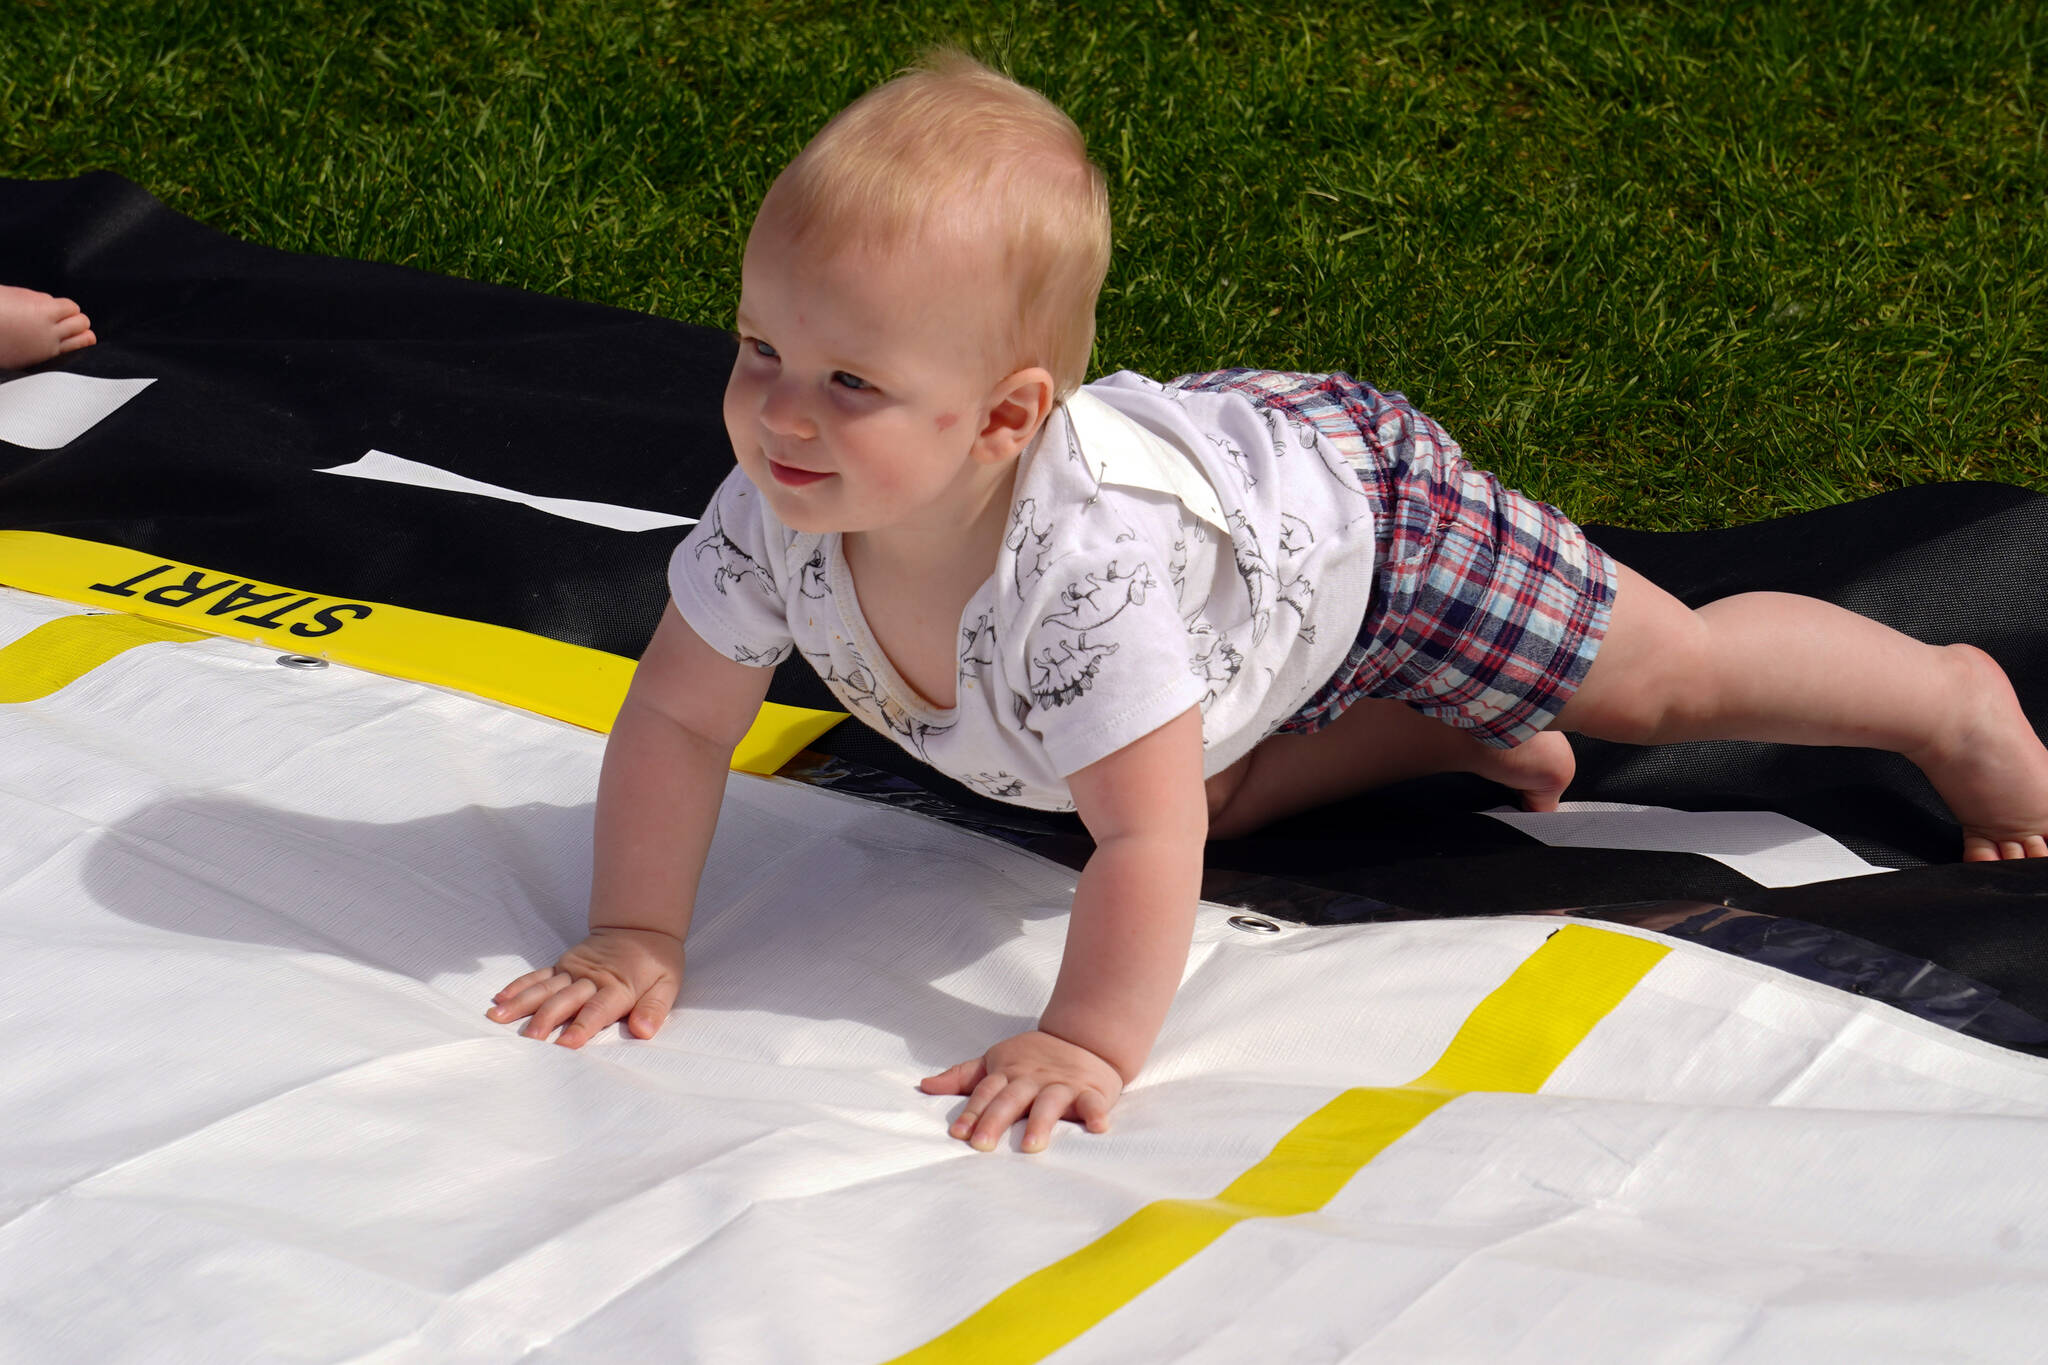 Flynn Byler, 8 months old, participates in the Diaper Derby, part of the Progress Days Fair at Soldotna Creek Park in Soldotna, Alaska, on Friday, July 21, 2023. Byler would ultimately win the race. (Jake Dye/Peninsula Clarion)